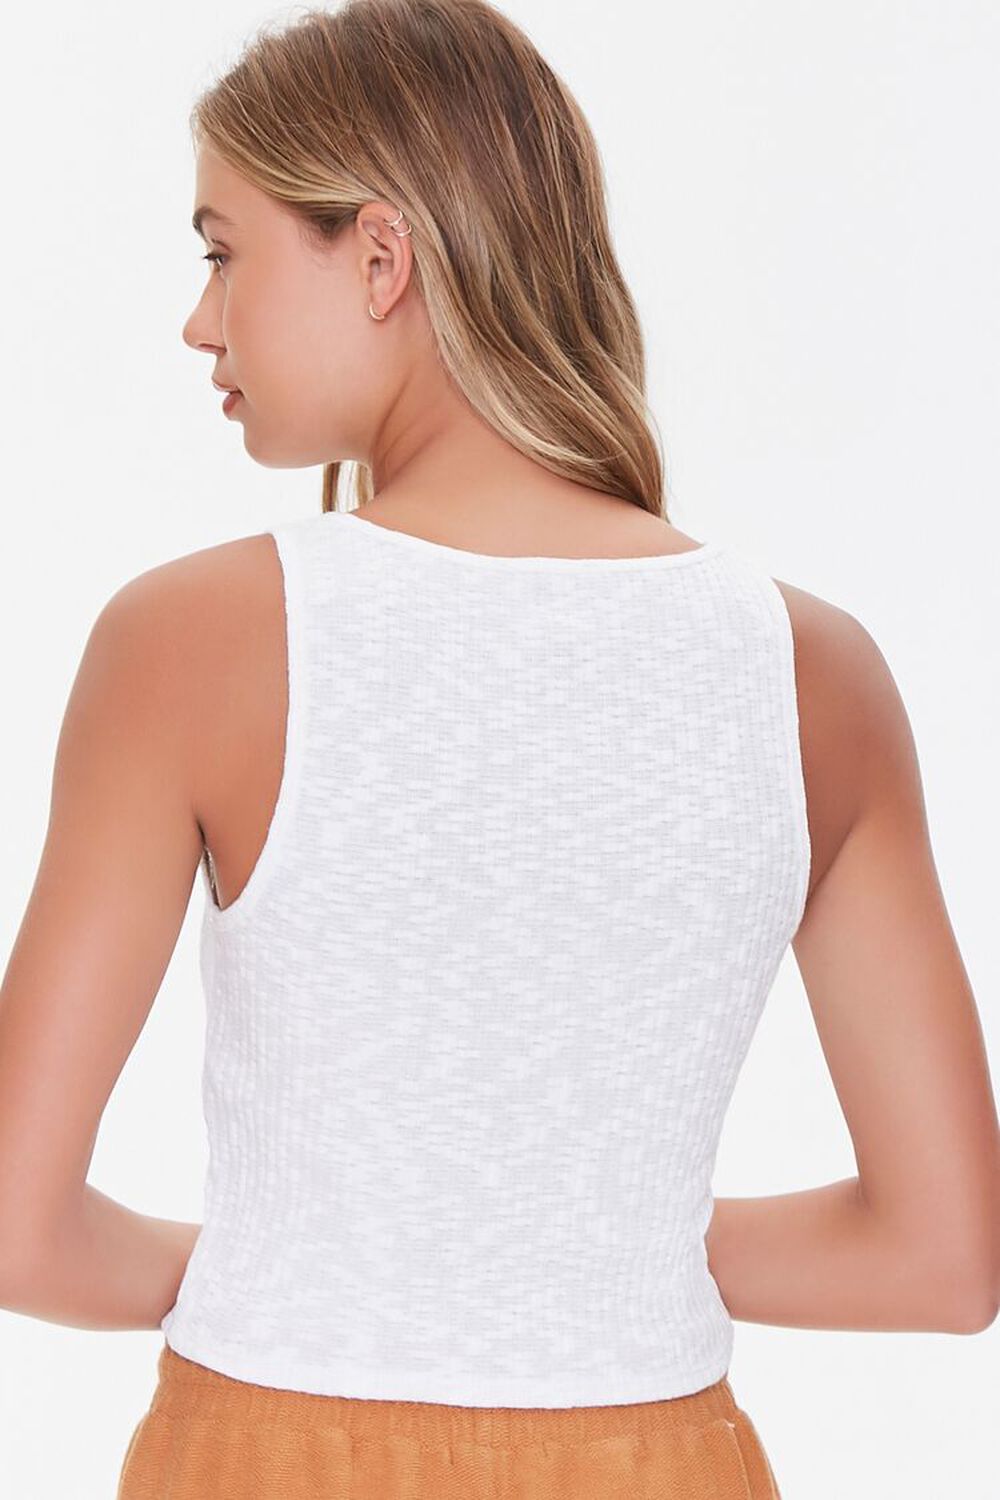 WHITE Ribbed Button-Front Tank Top, image 3